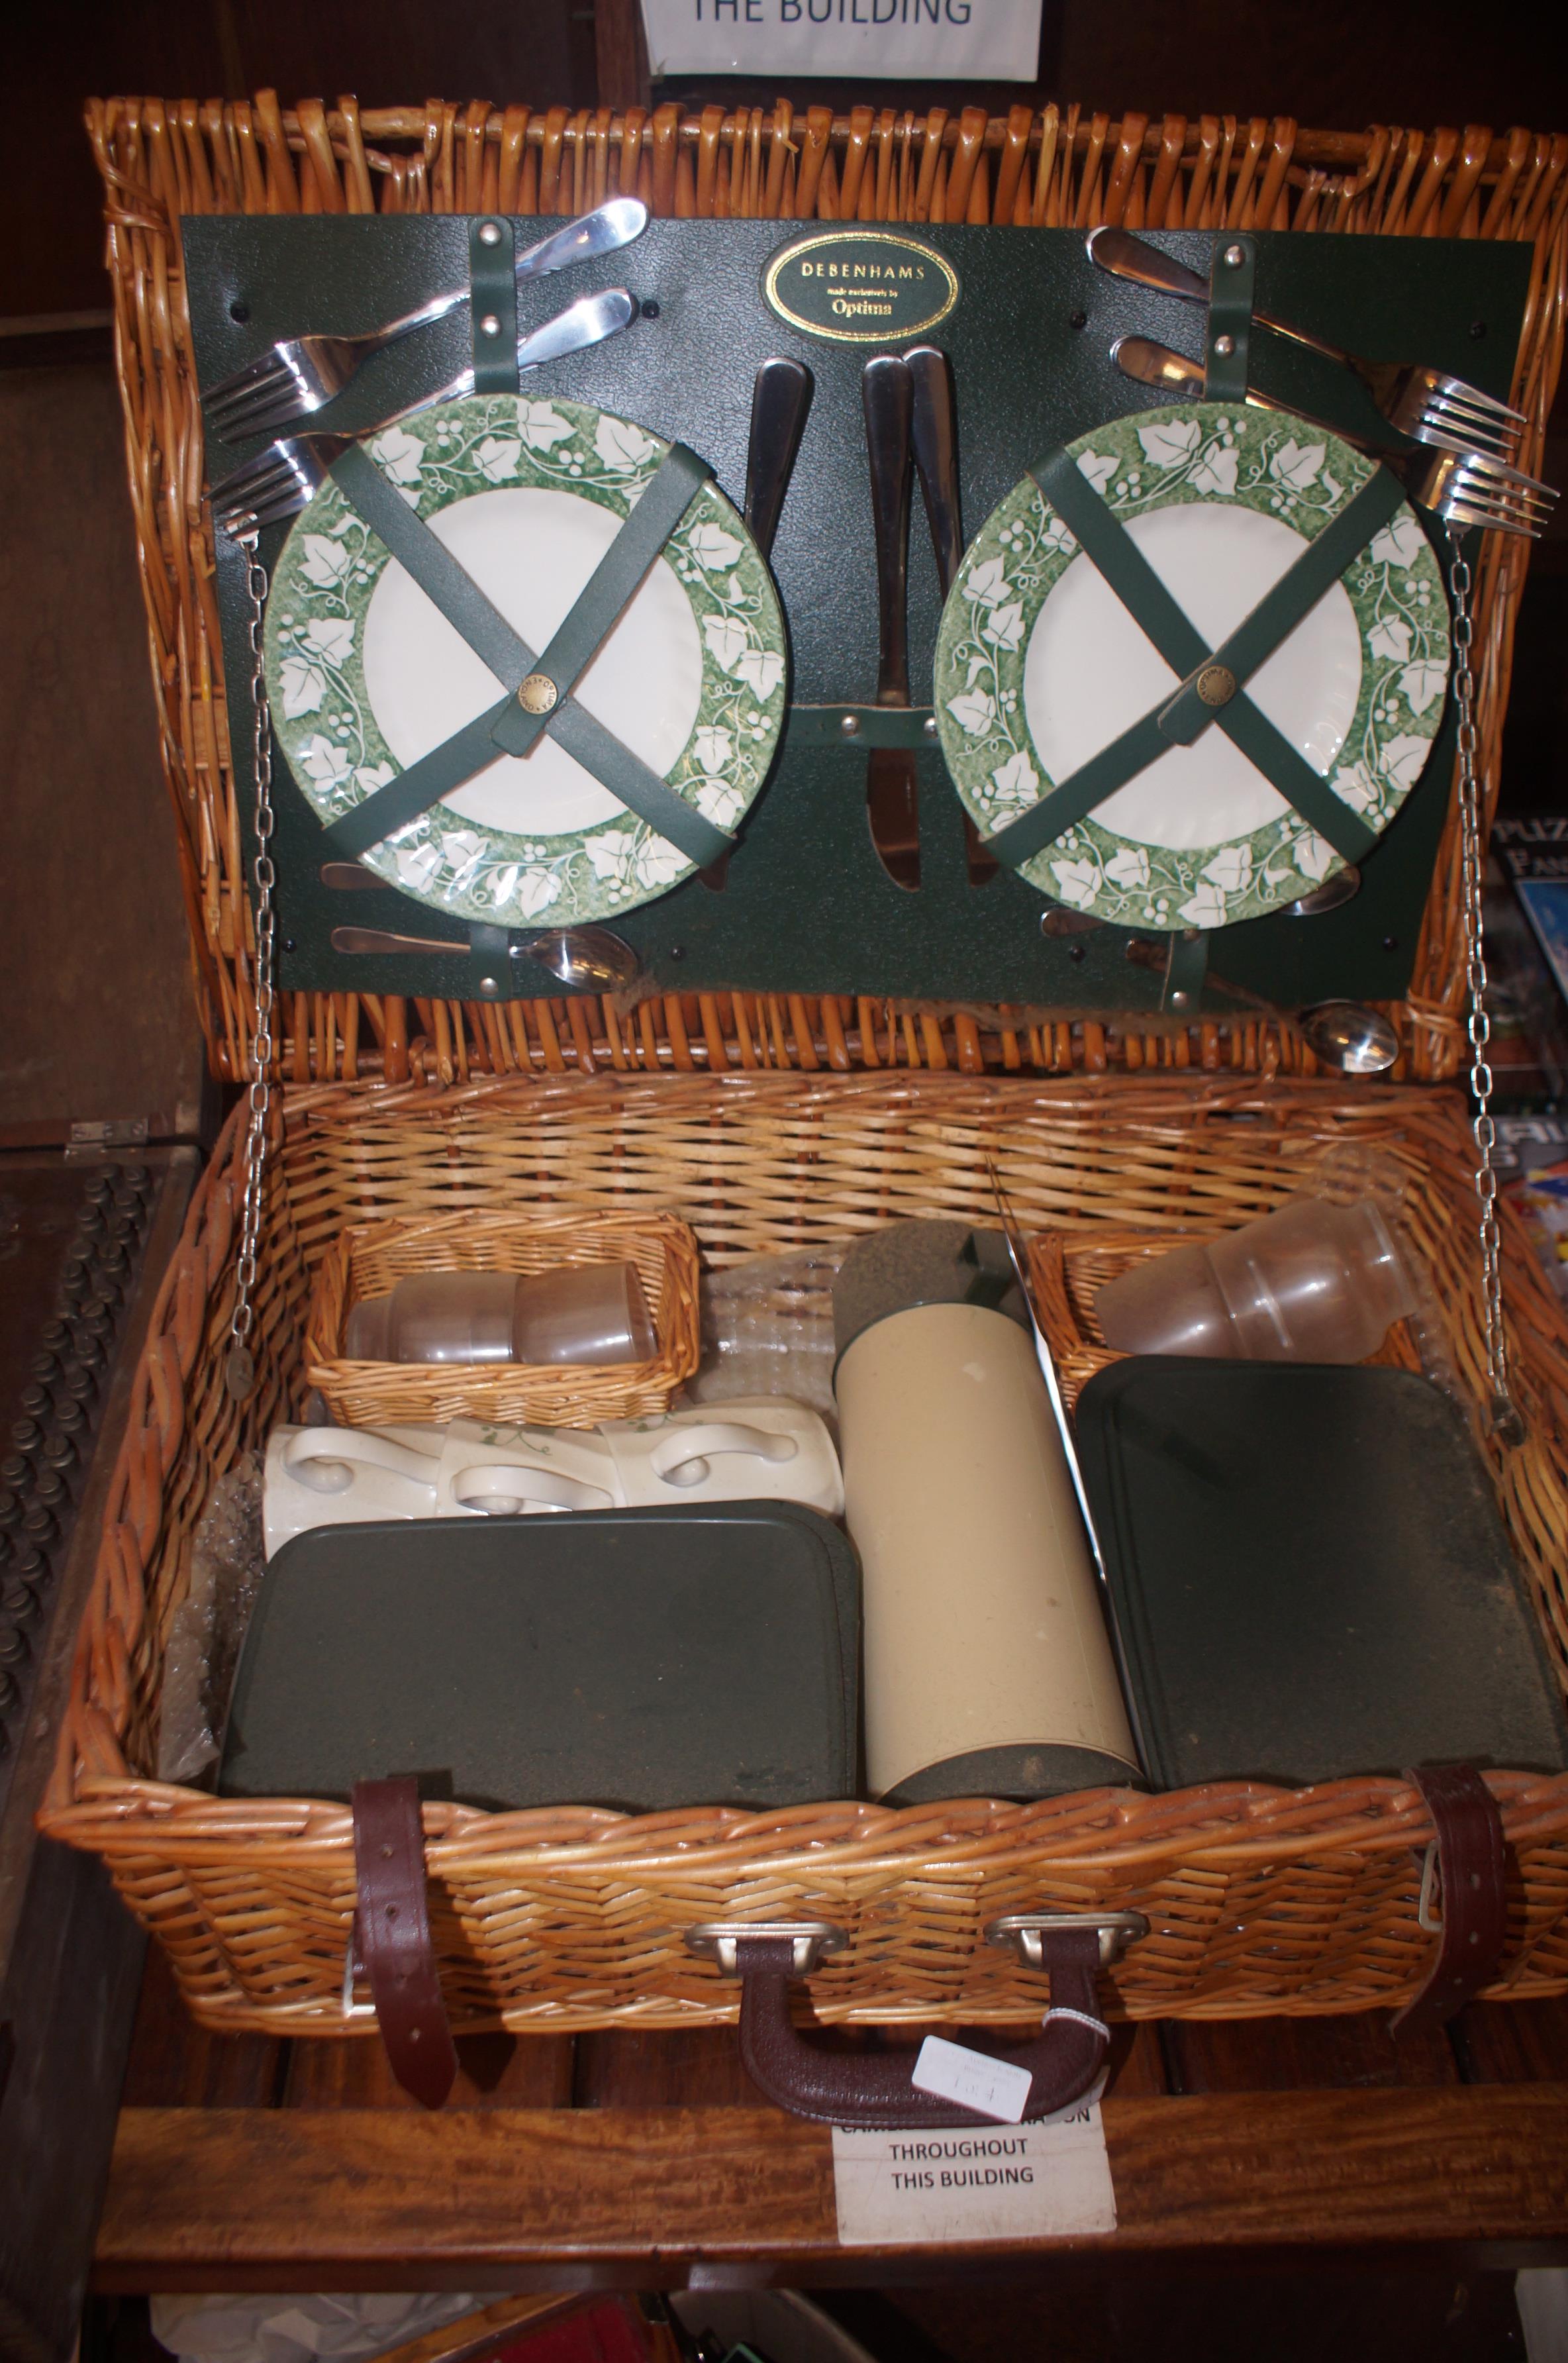 Picnic Basket and Contents